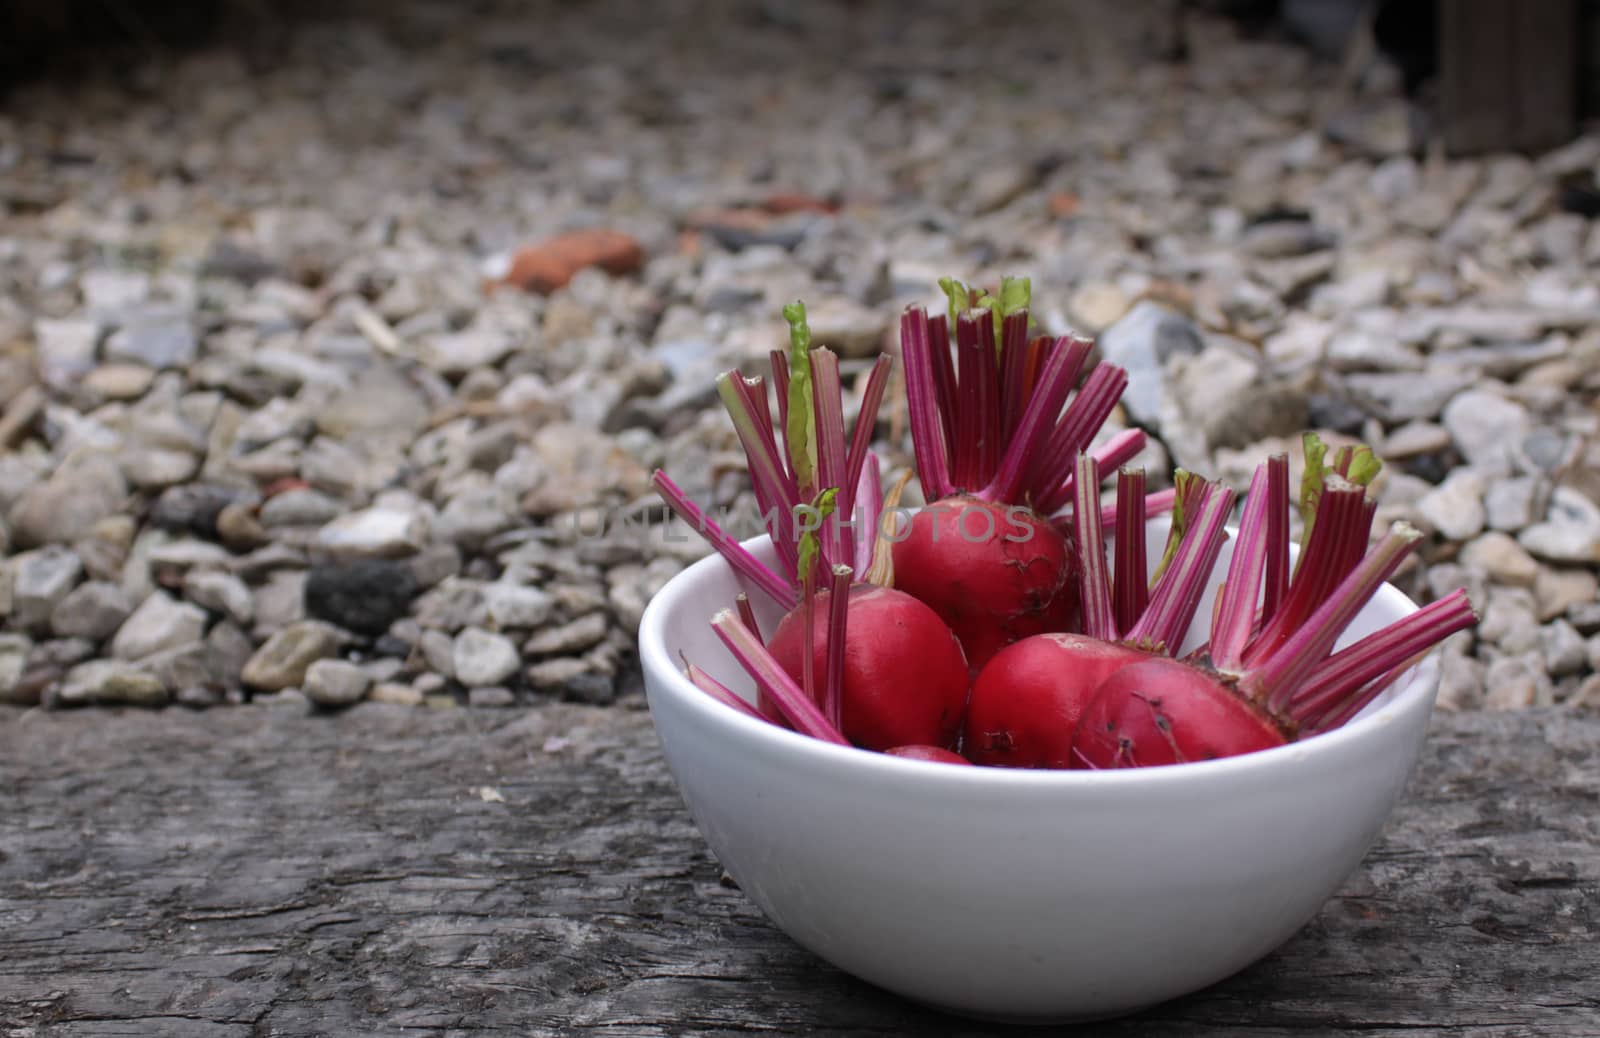 Beetroot in a Bowl by naffarts2